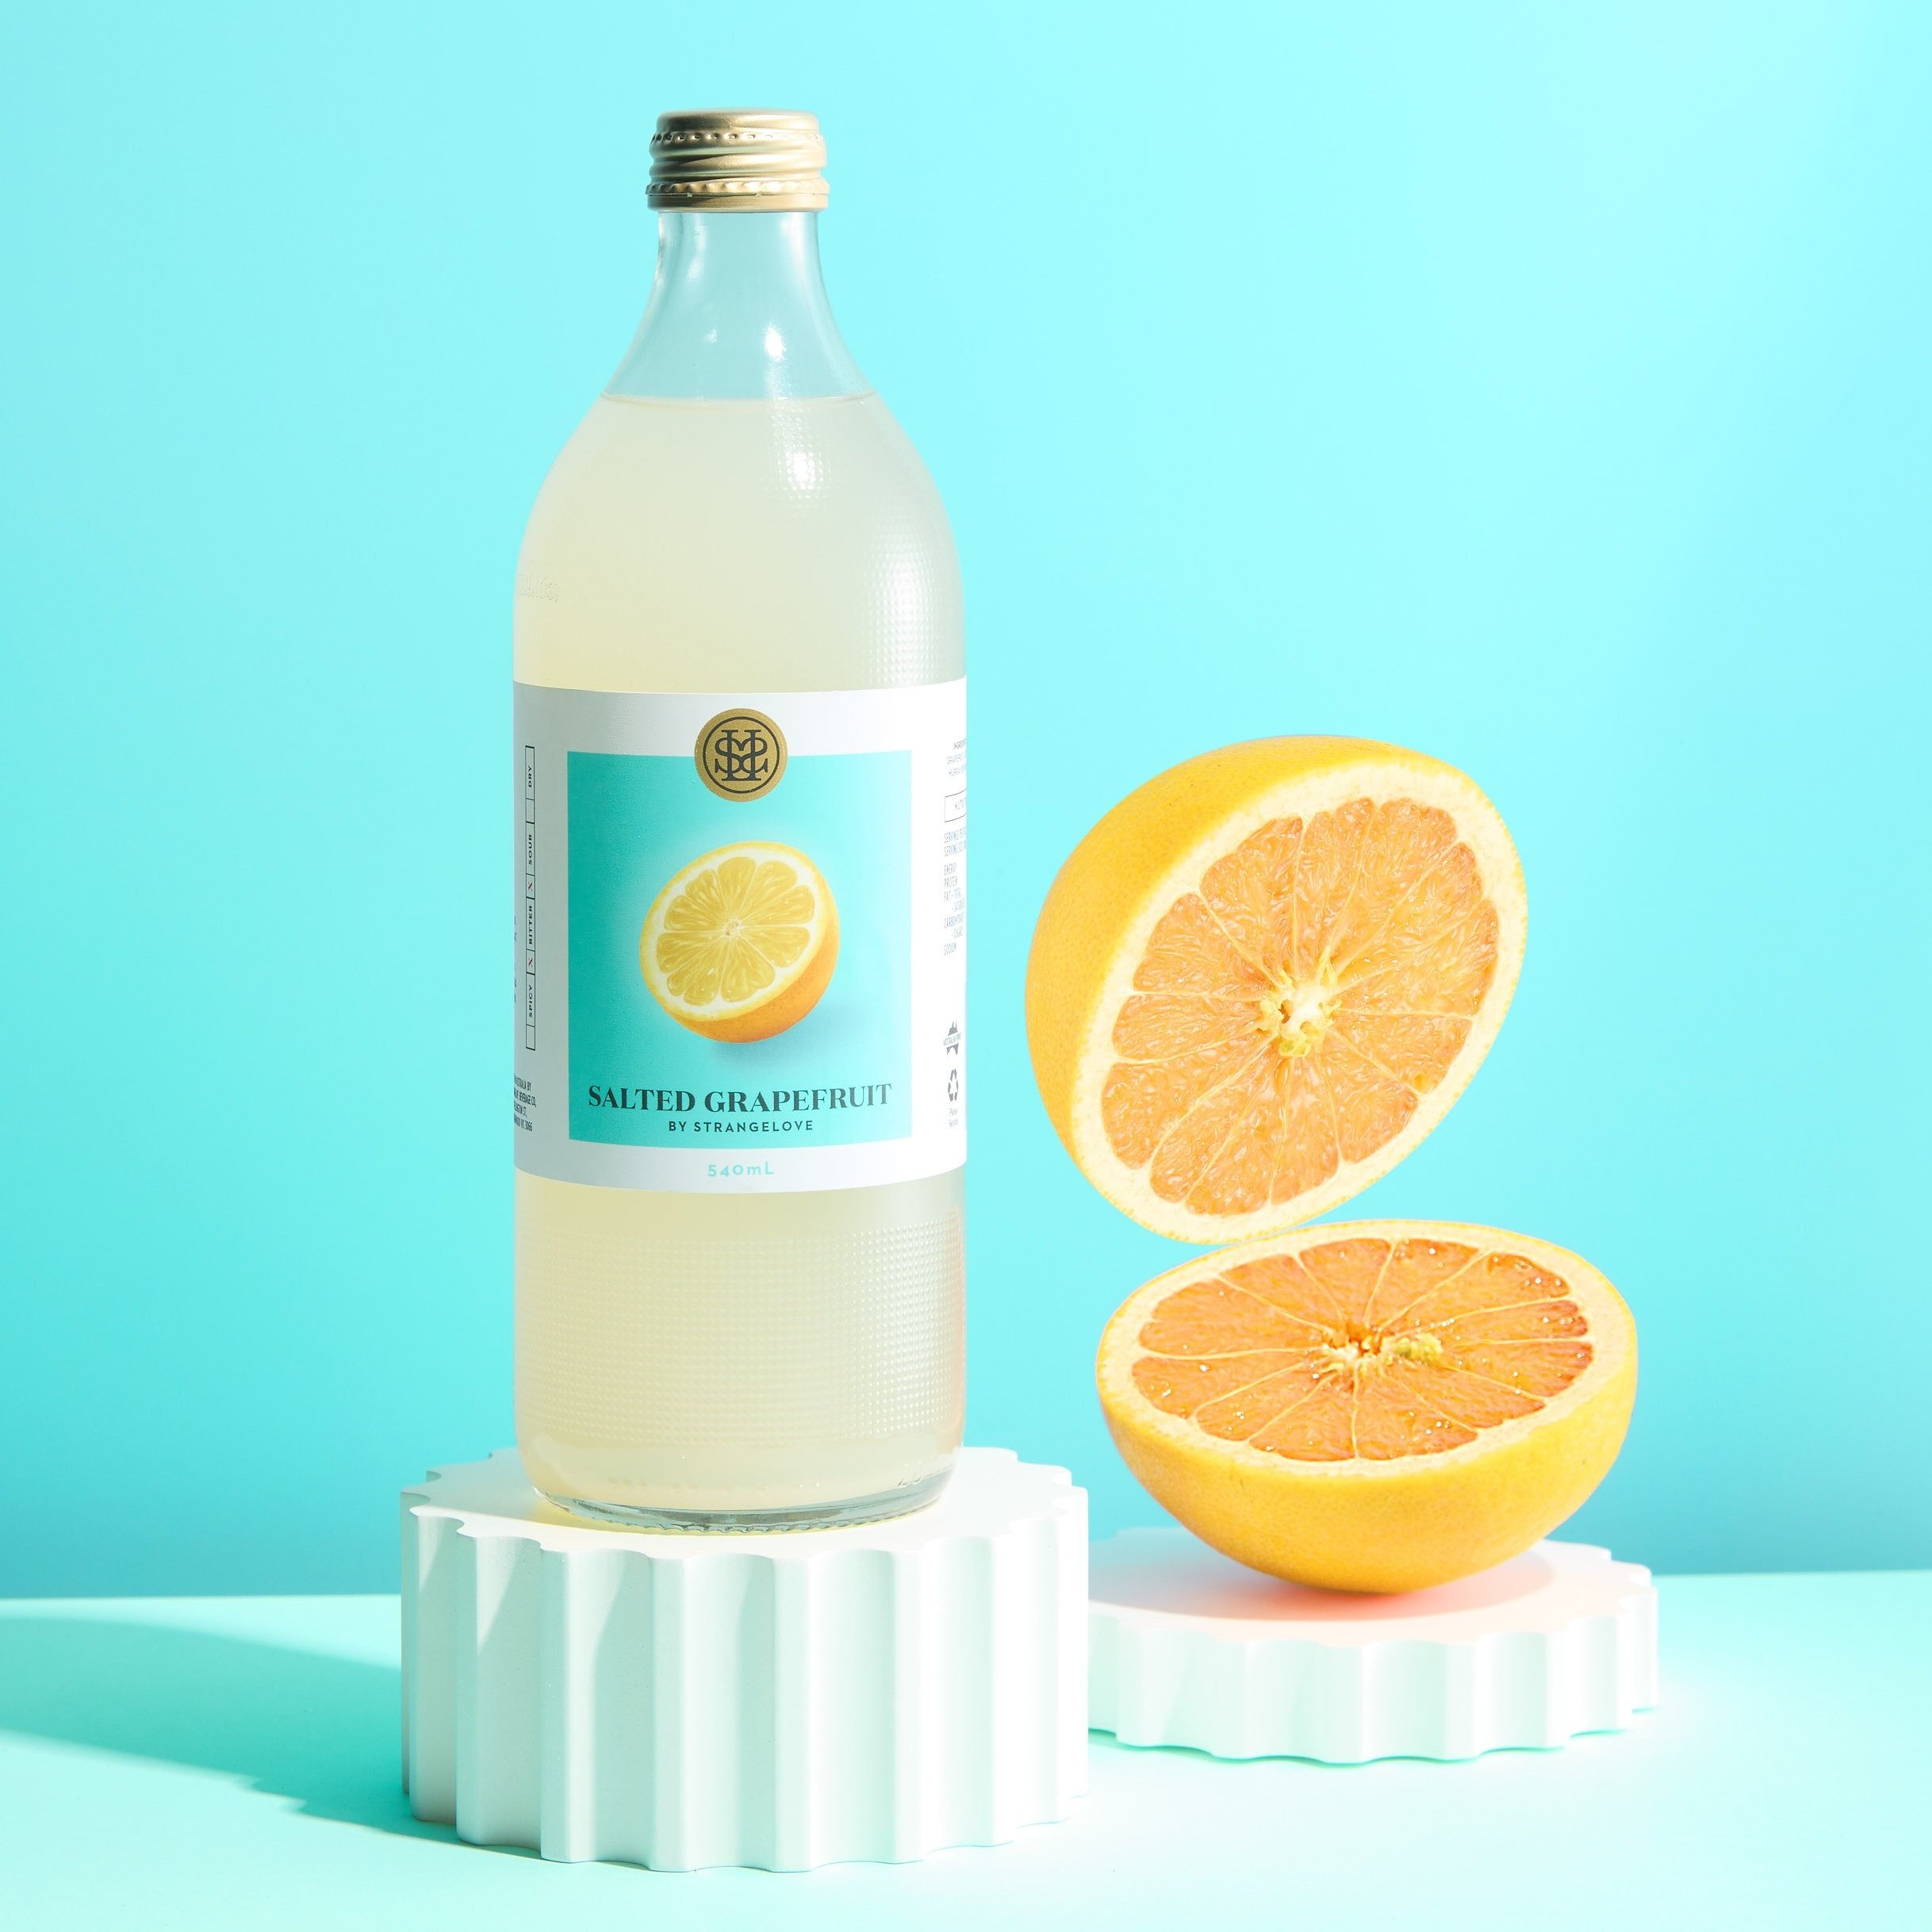 Controlling the background color tone is crucial in product photography, especially to align with the brand packaging color. This often requires numerous subtle adjustments in Photoshop. While the bottle remains static, ensuring harmony with the vivi